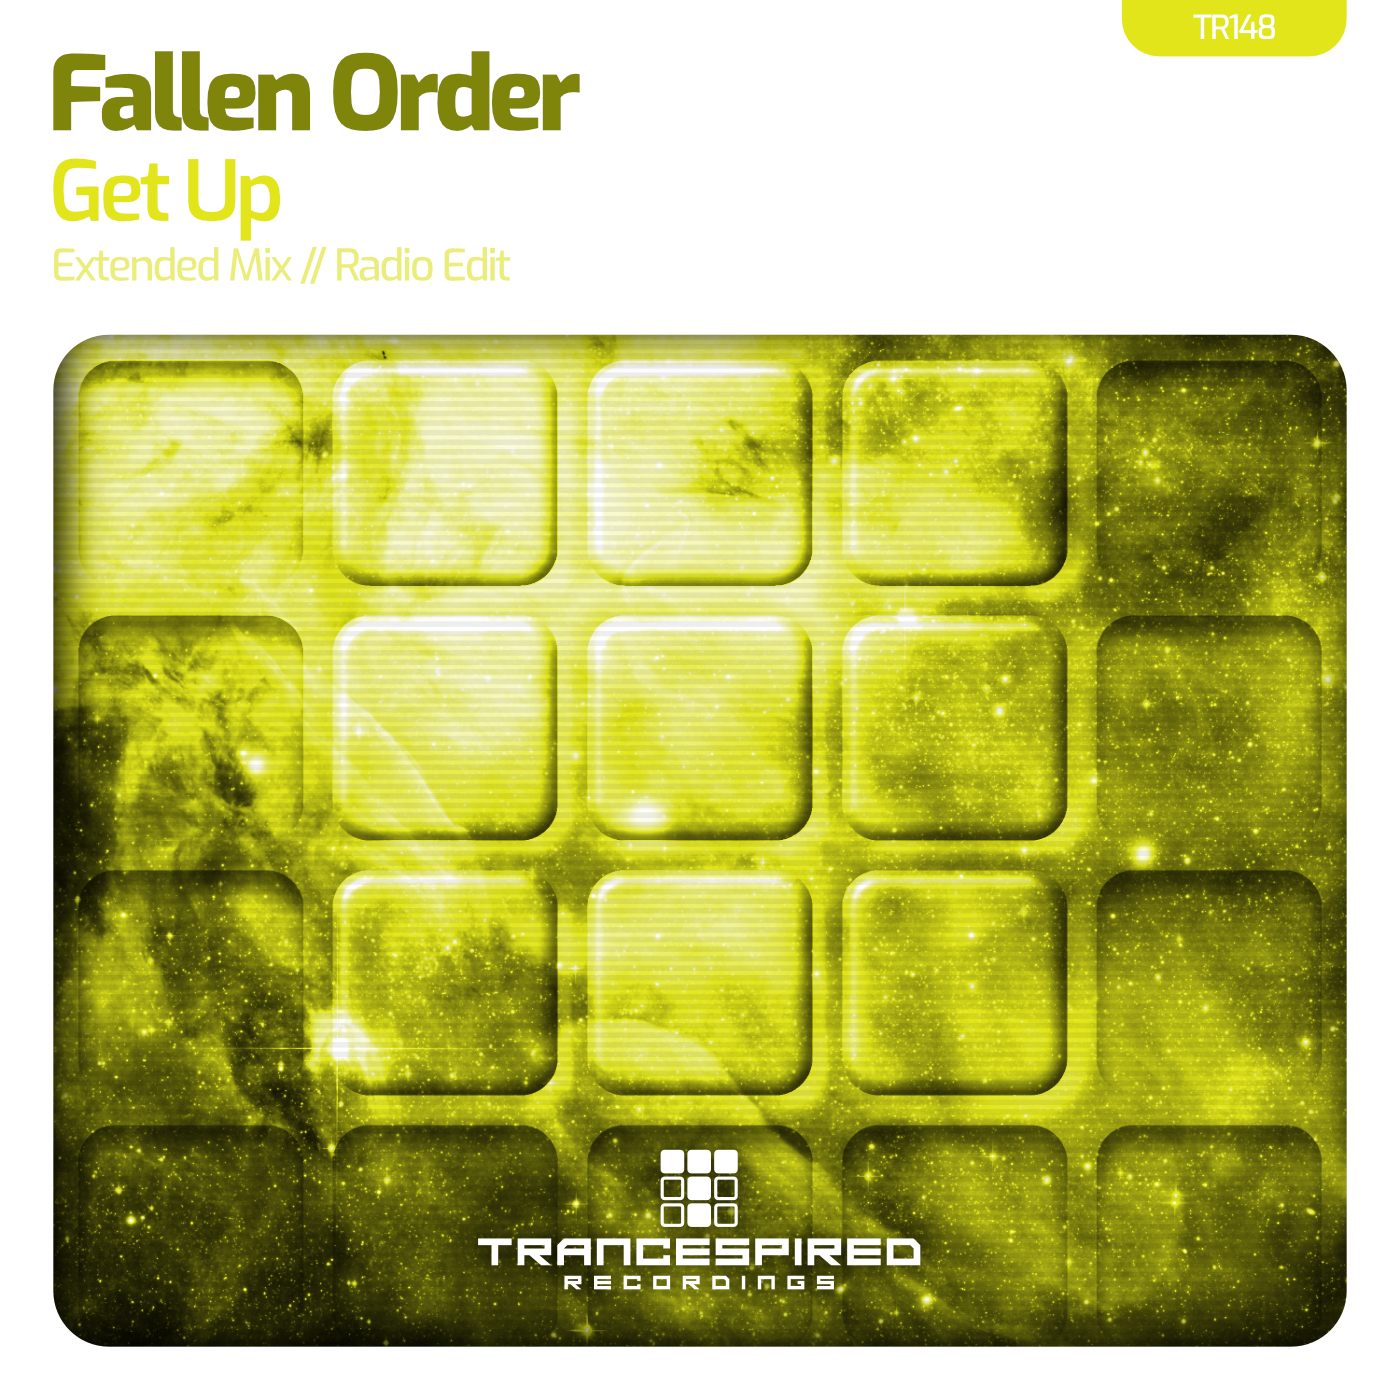 Fallen Order presents Get Up on Trancespired Recordings